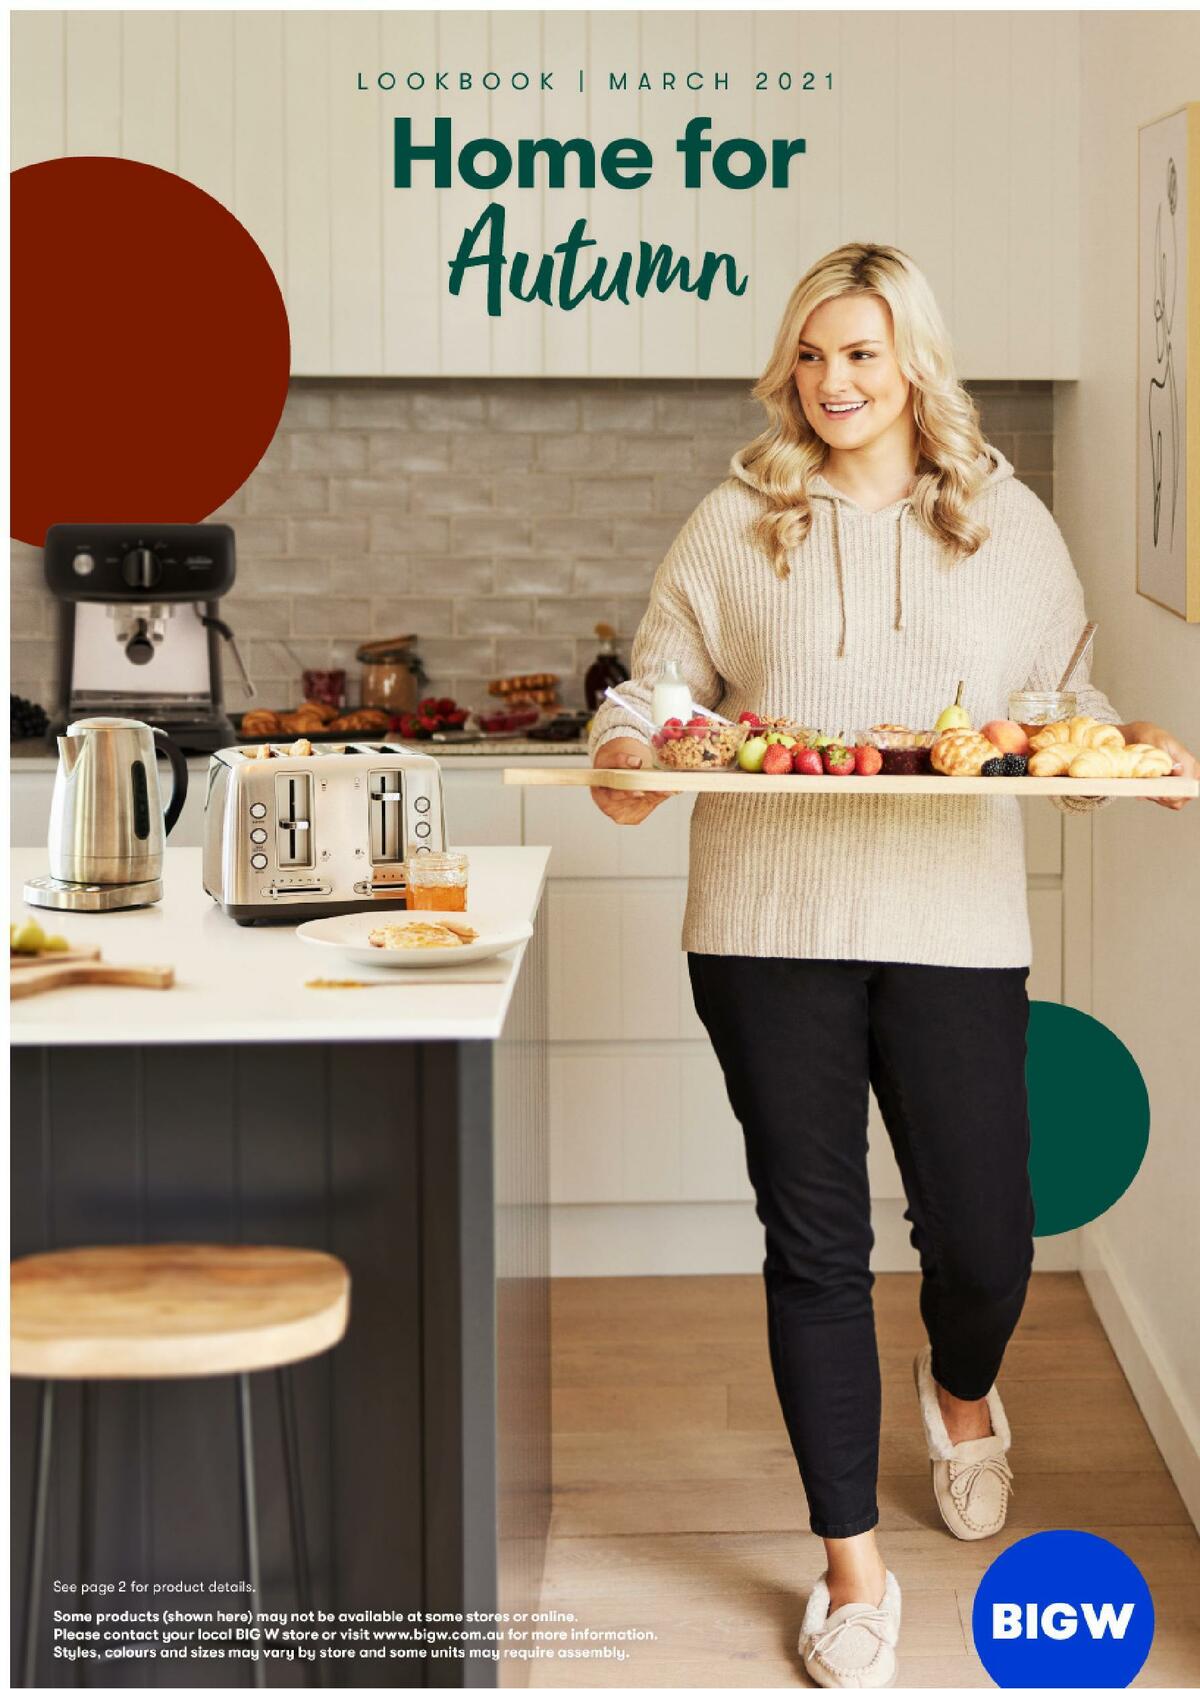 Big W Home for Autumn Lookbook Catalogues from 29 March